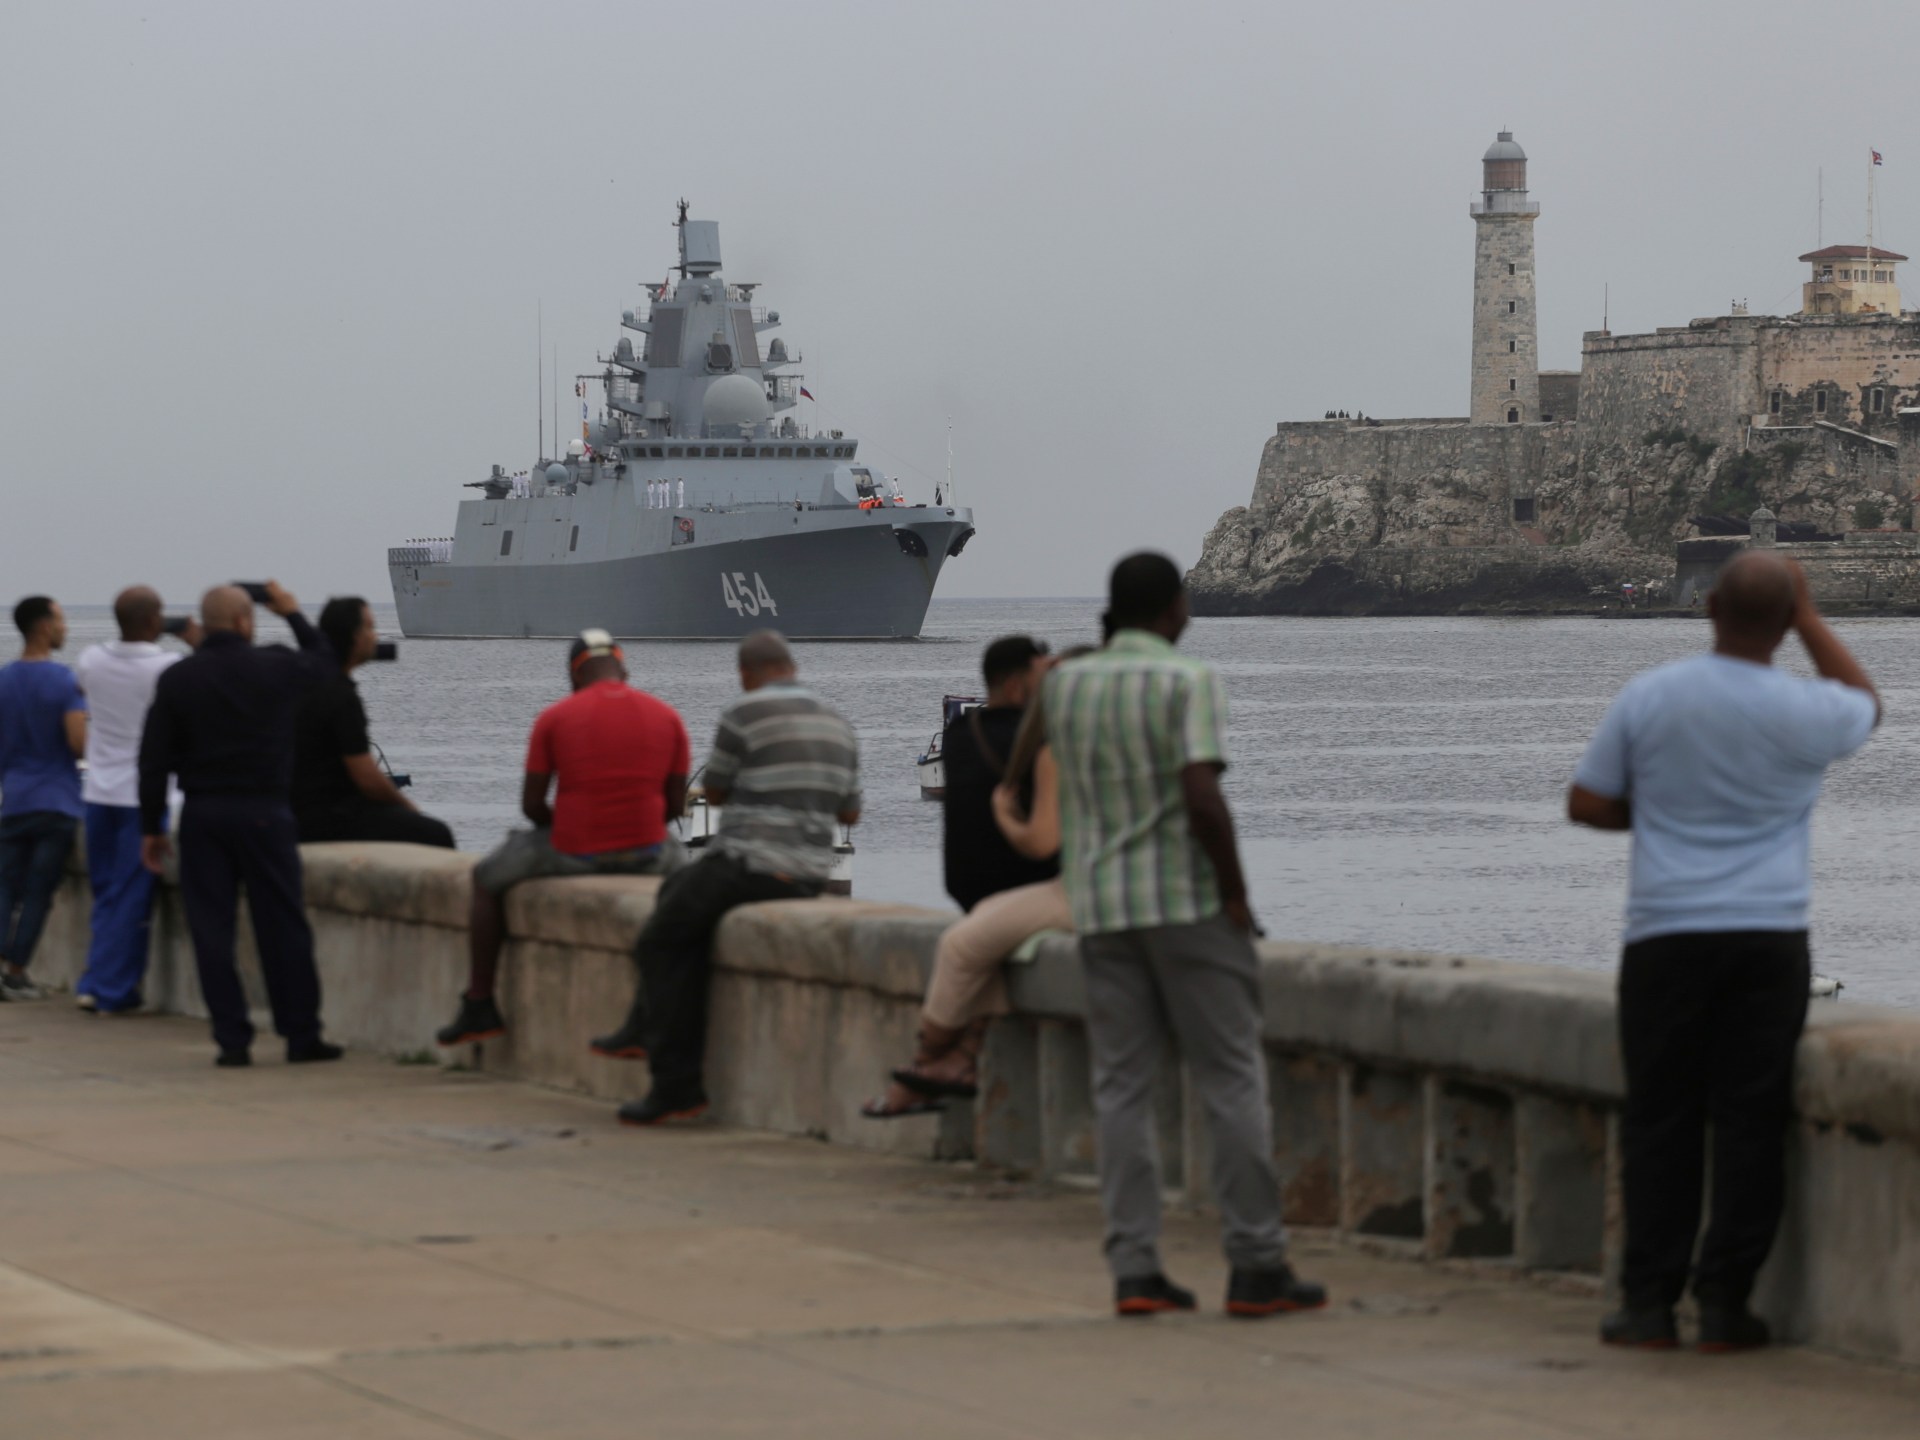 Russian navy fleet, including frigate, nuclear-powered sub, arrives in Cuba